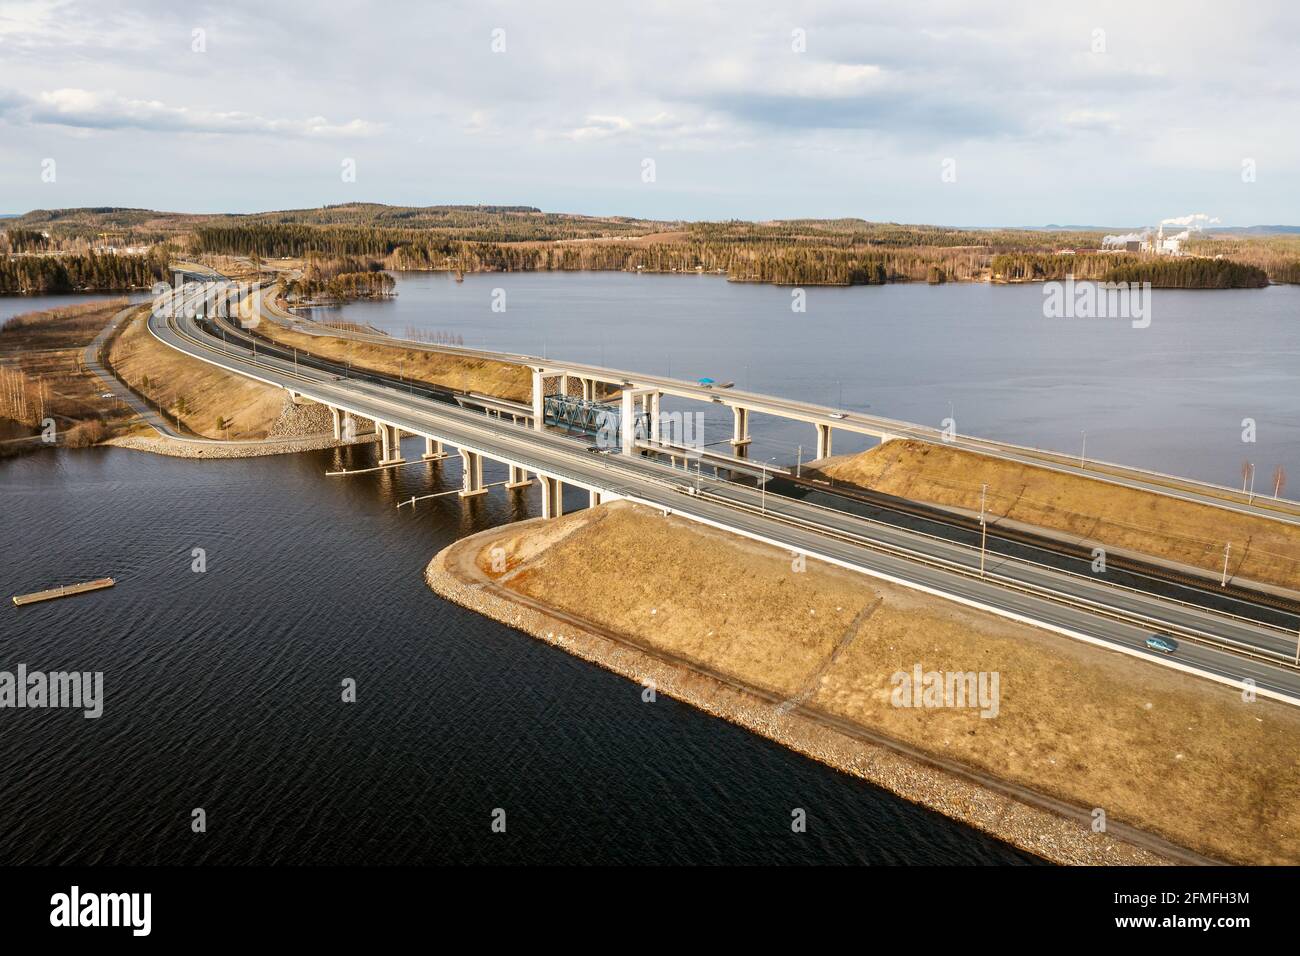 Motorway, railway and road bridges in a lake landscape north of Kuopio in eastern Finland in the spring sunshine. Stock Photo